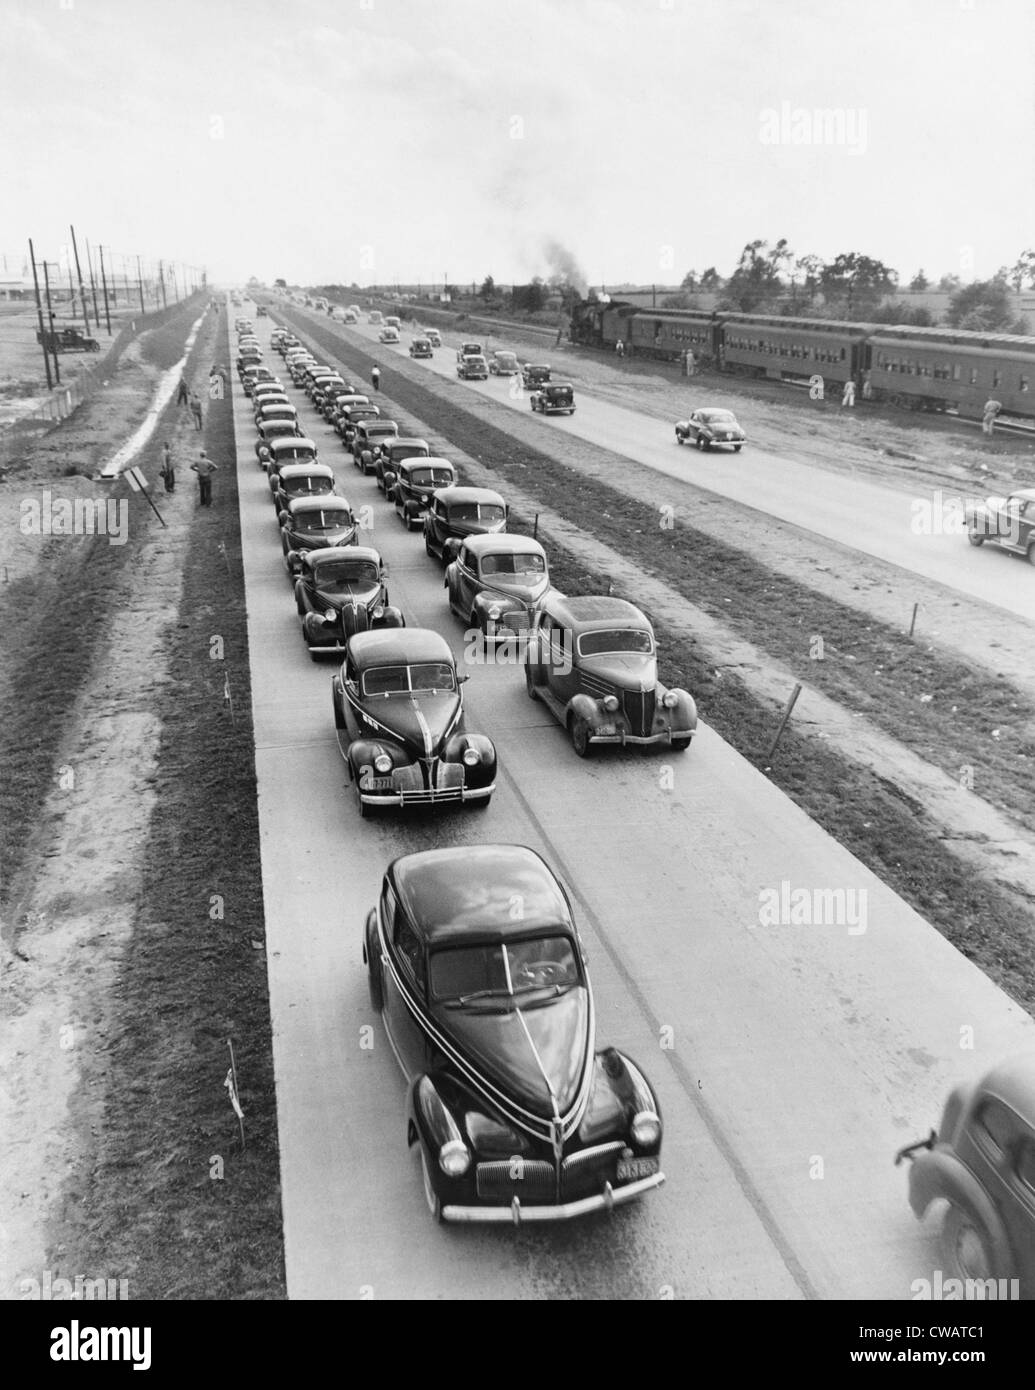 U.S. Highway 62 was expanded into a four lane highway in the 1940s.  Post World War II highway construction committed the Stock Photo